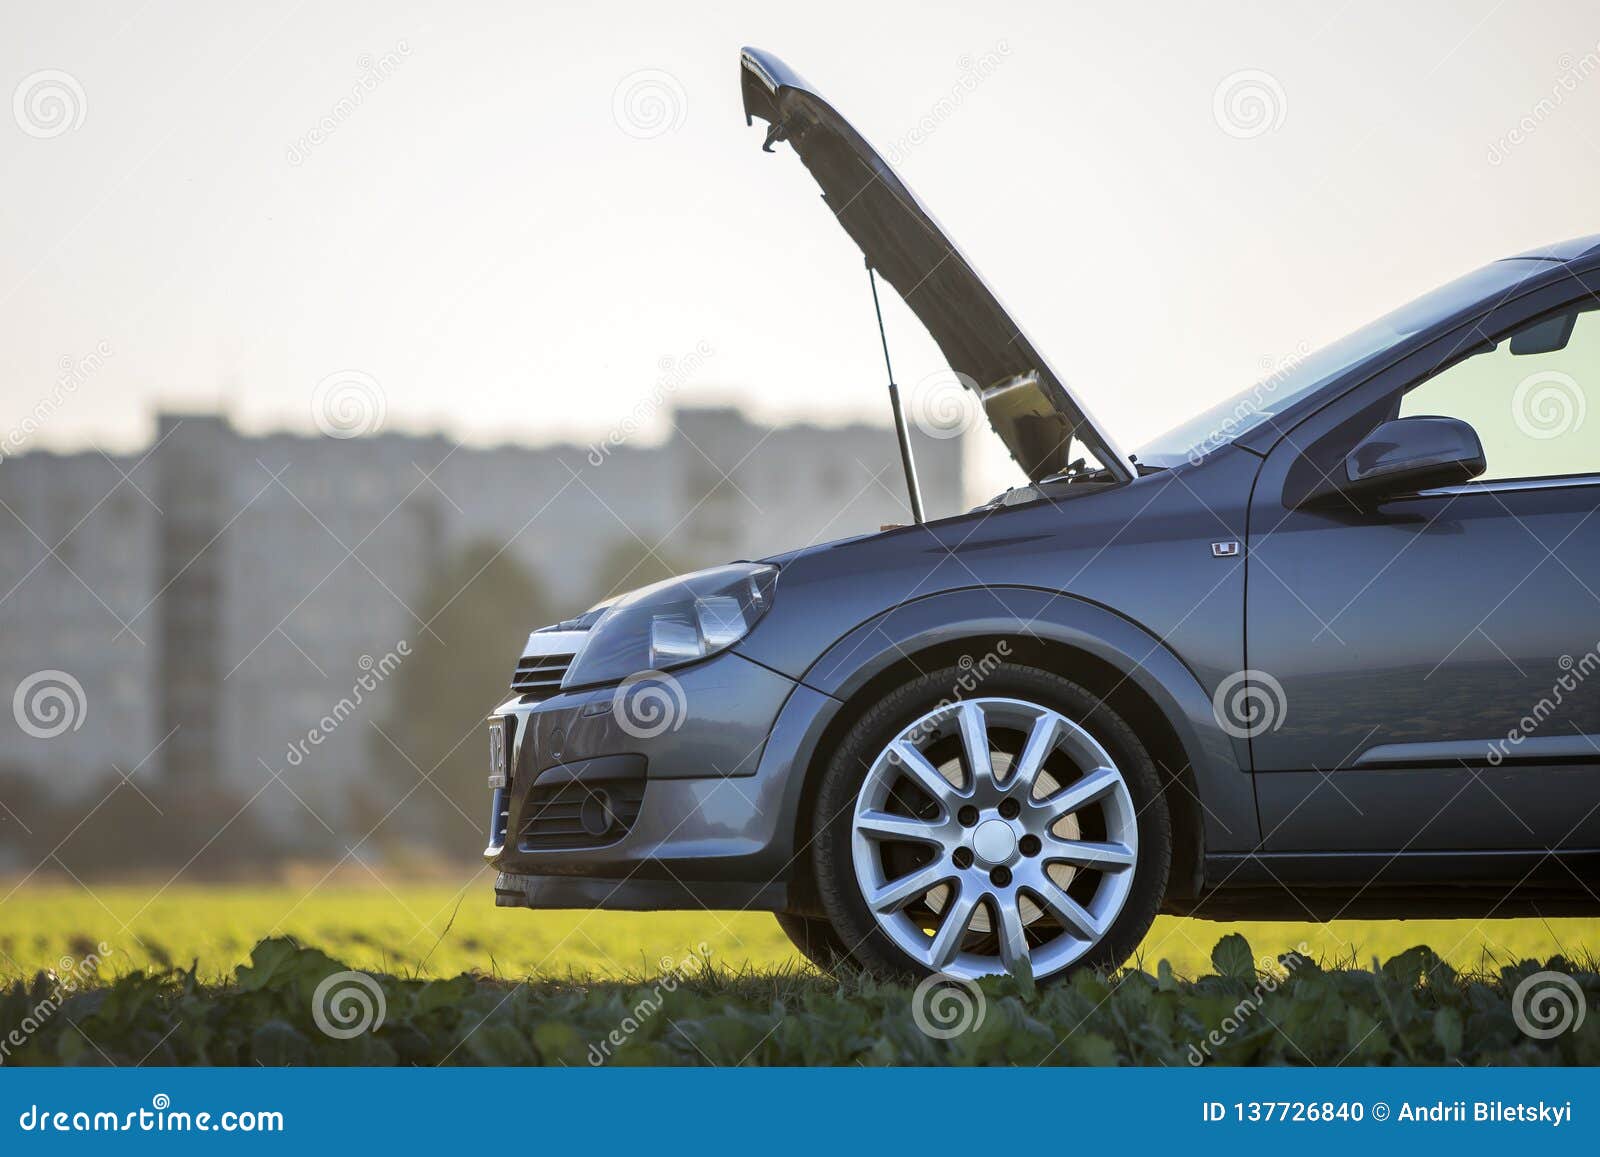 modified image of a fictional non existent car. car with open hood on empty gravel field road on blurred bright sky copy space